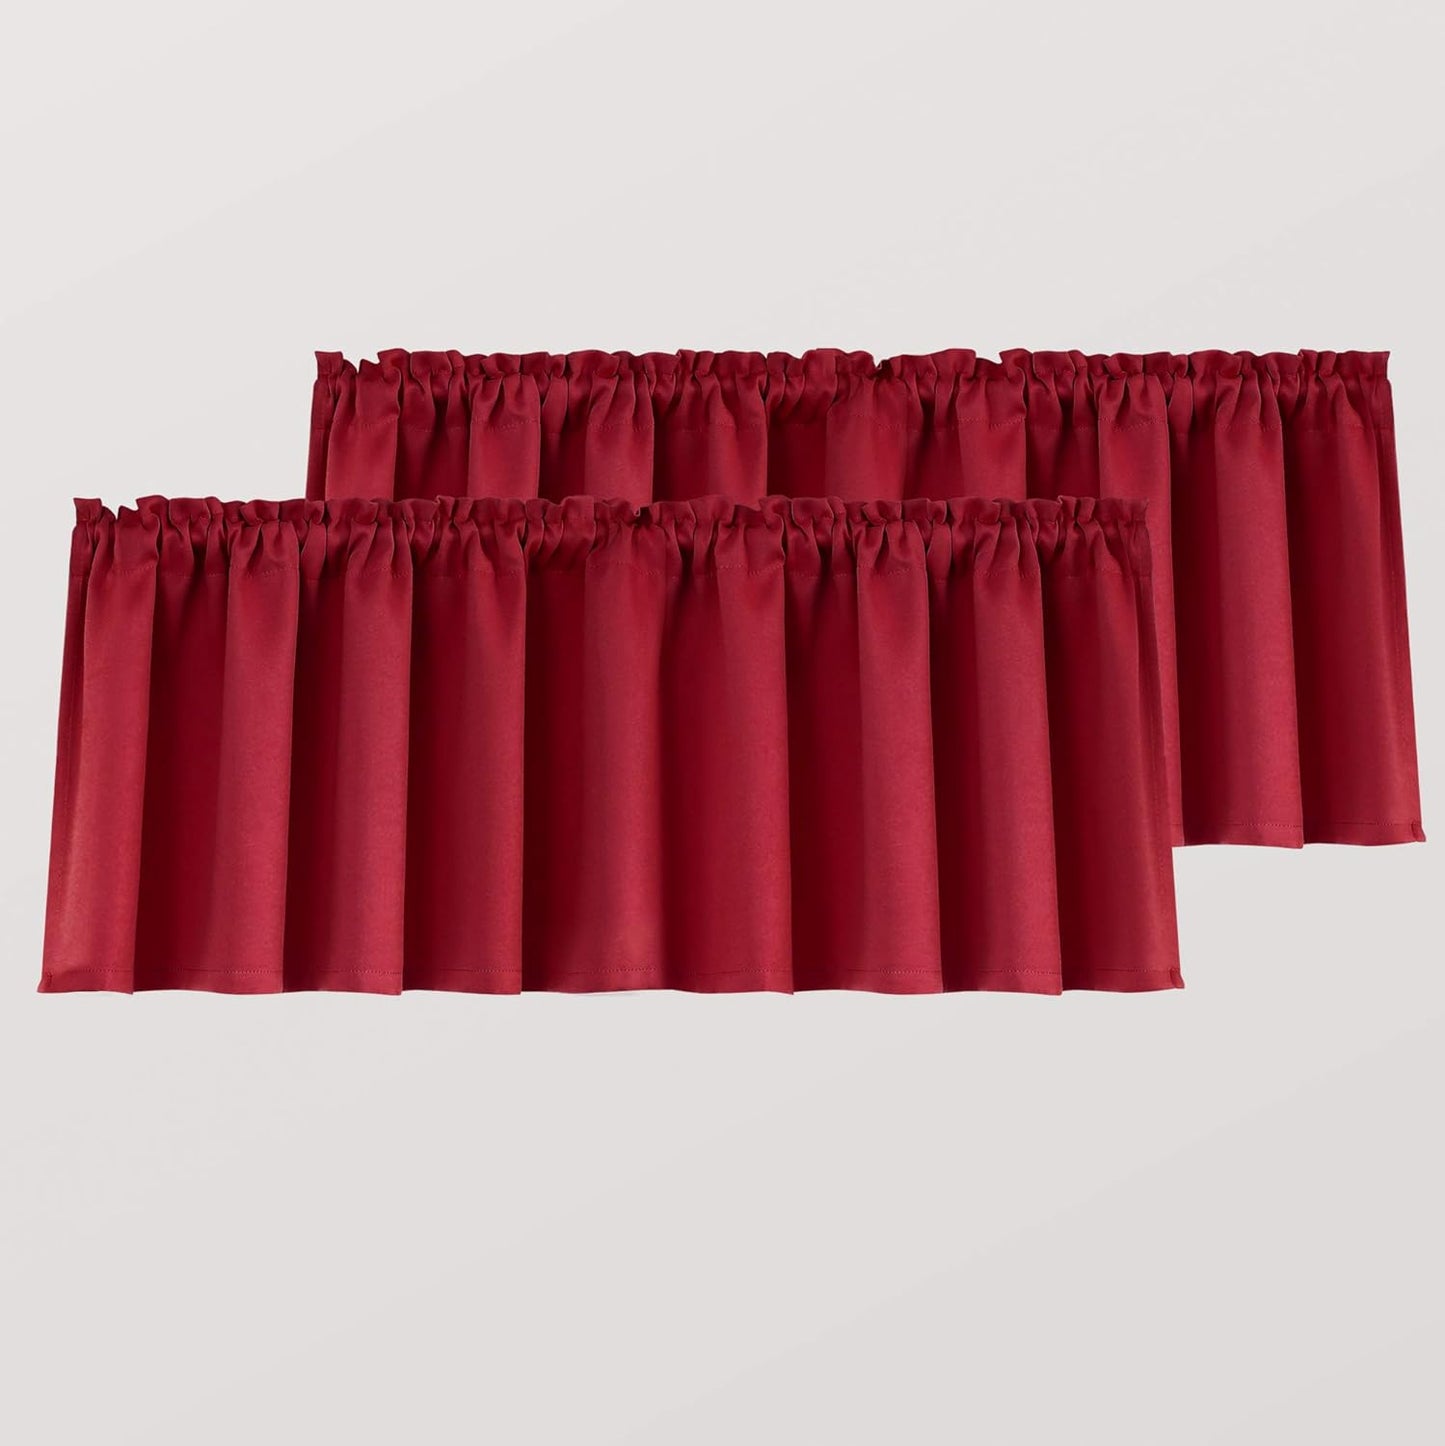 Mrs.Naturall Beige Valance Curtains for Windows 36X16 Inch Length  MRS.NATURALL TEXTILE Red 52X18 